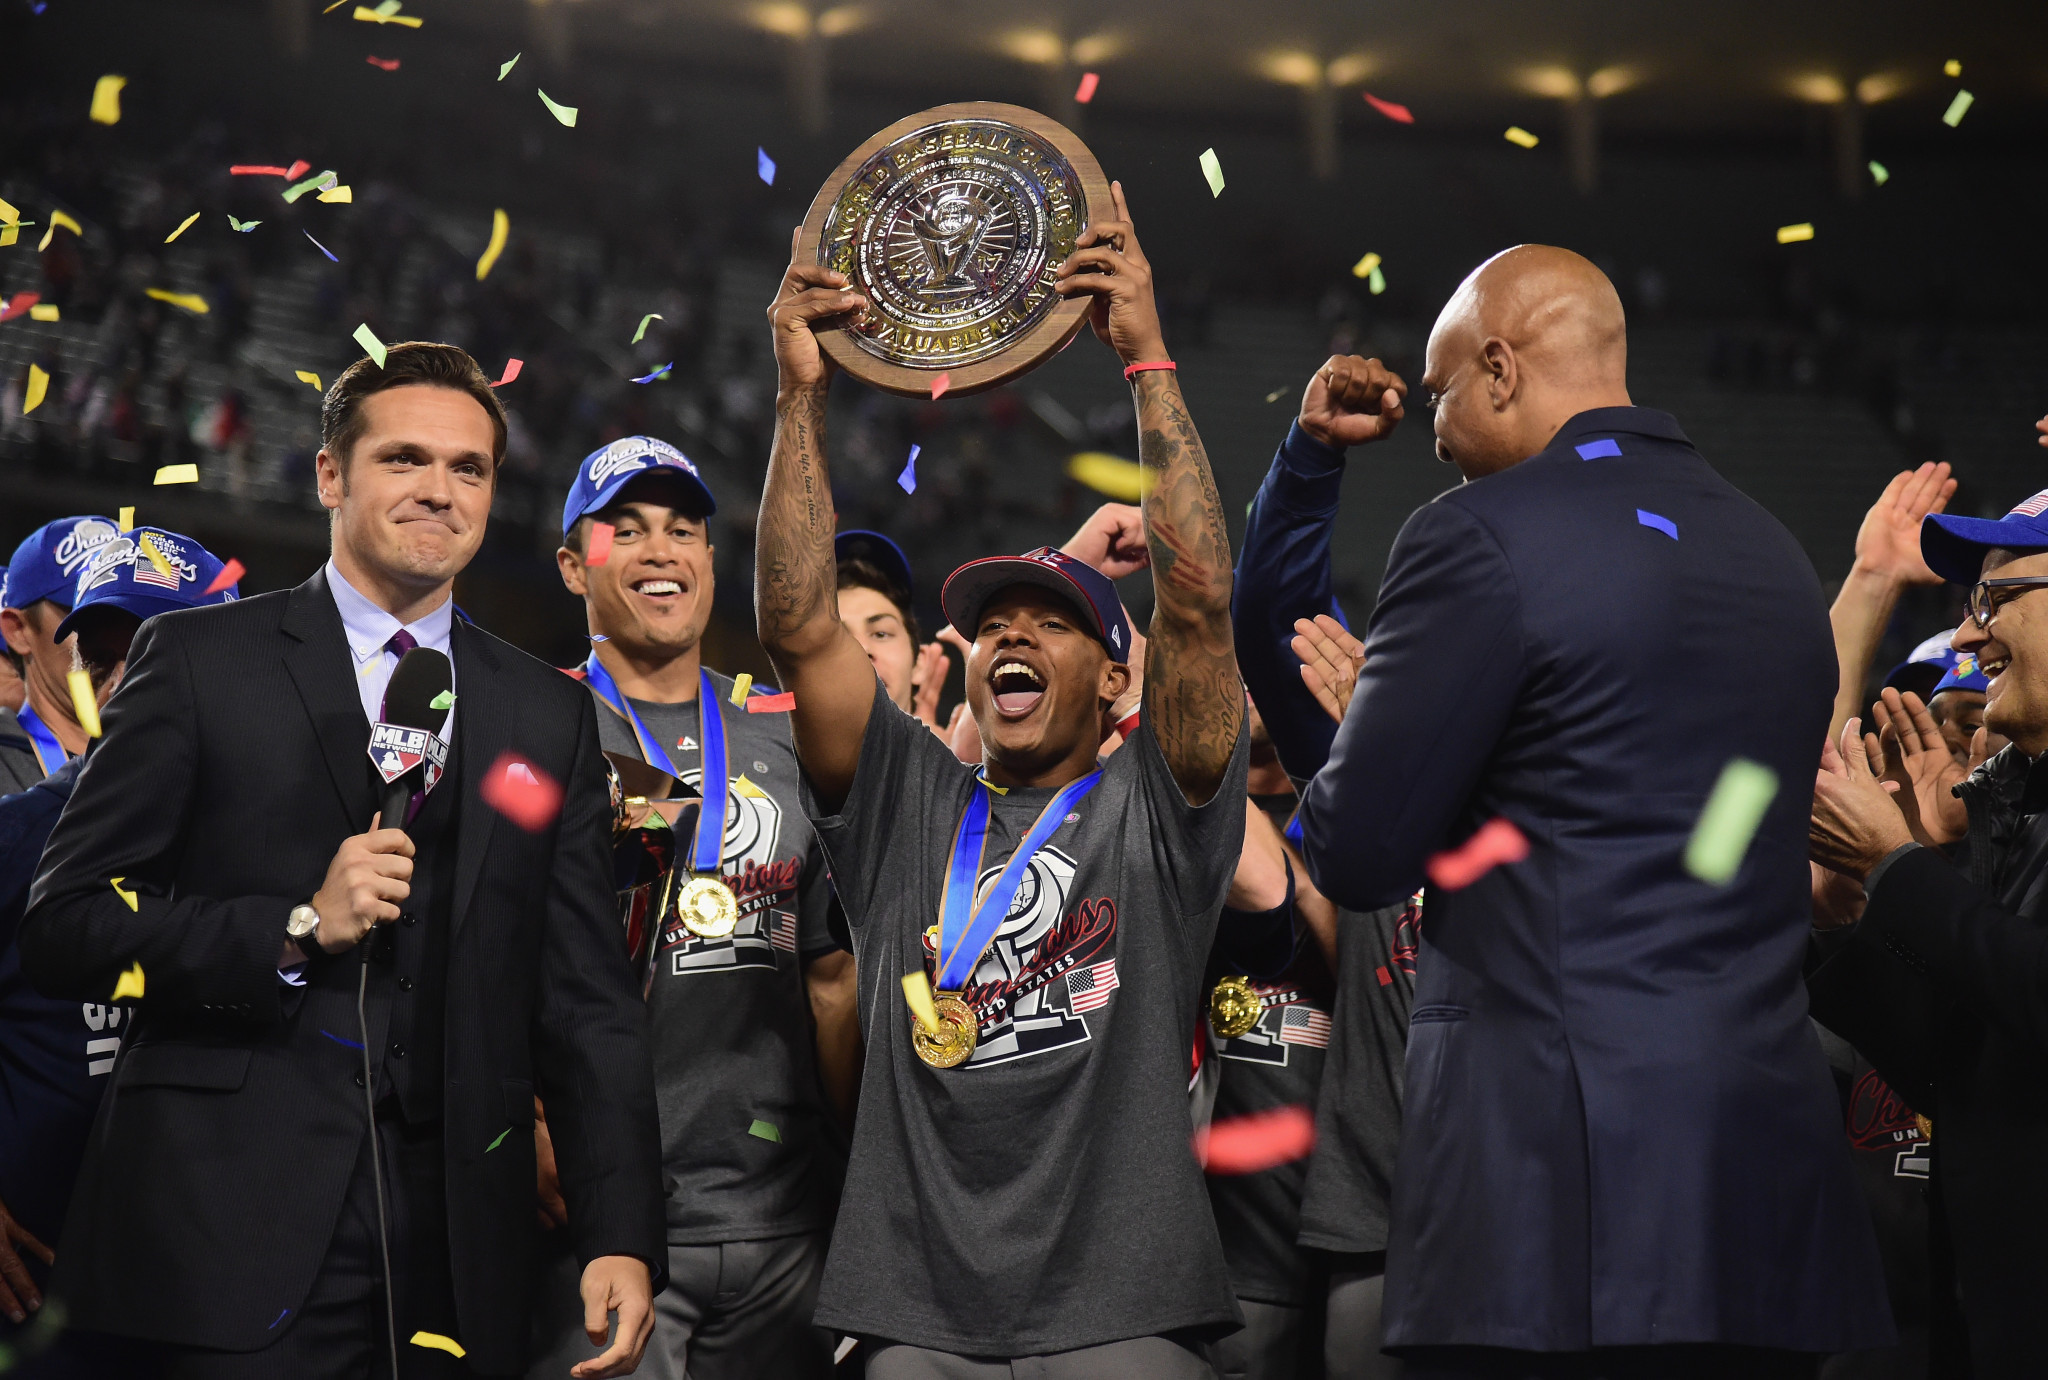 The United States are the holders of the World Baseball Classic trophy ©Getty Images